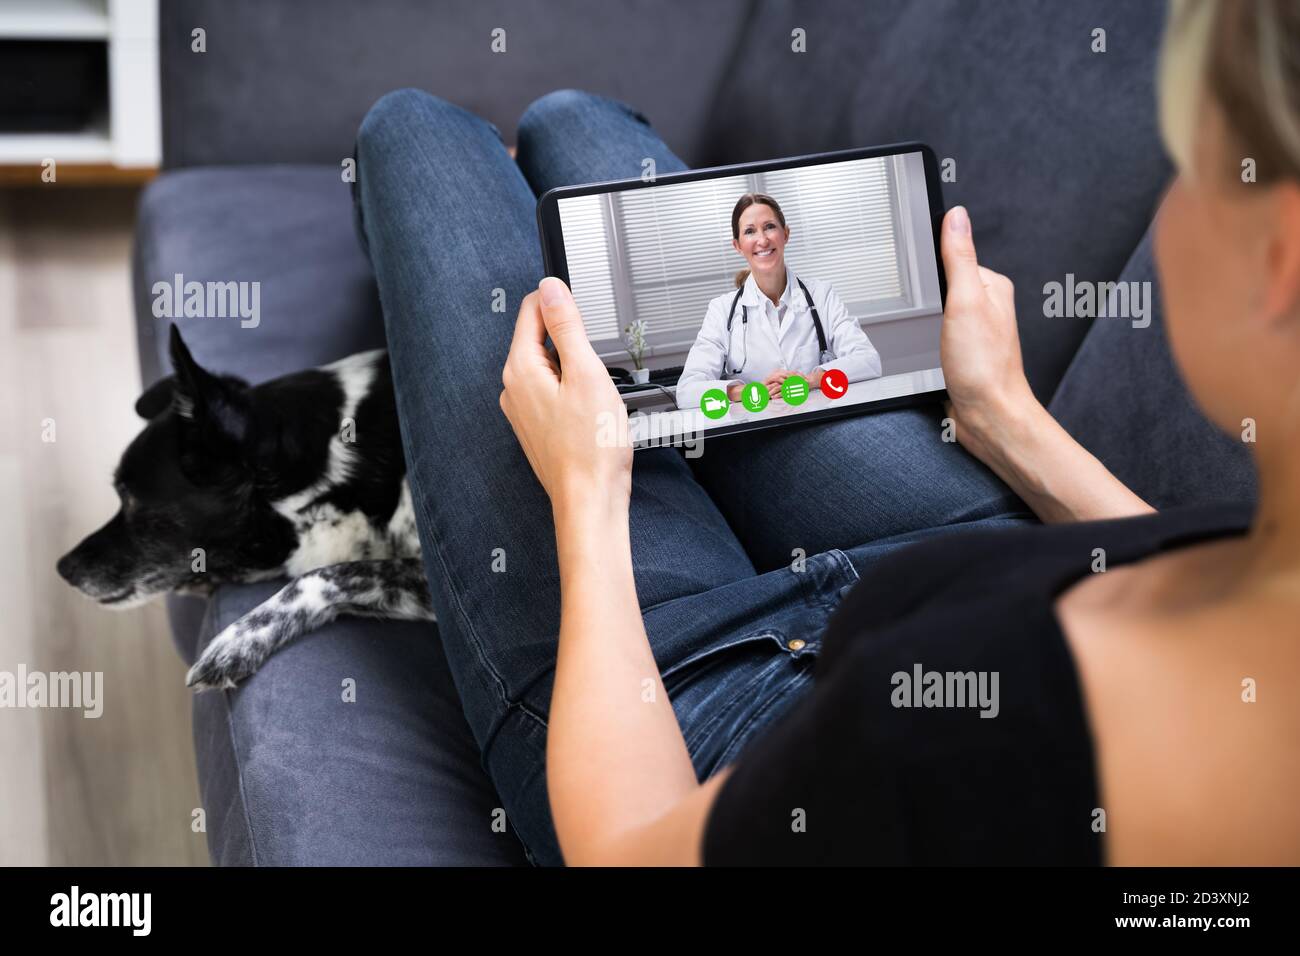 Web Video Conference Call With Doctor On Tablet Computer Stock Photo